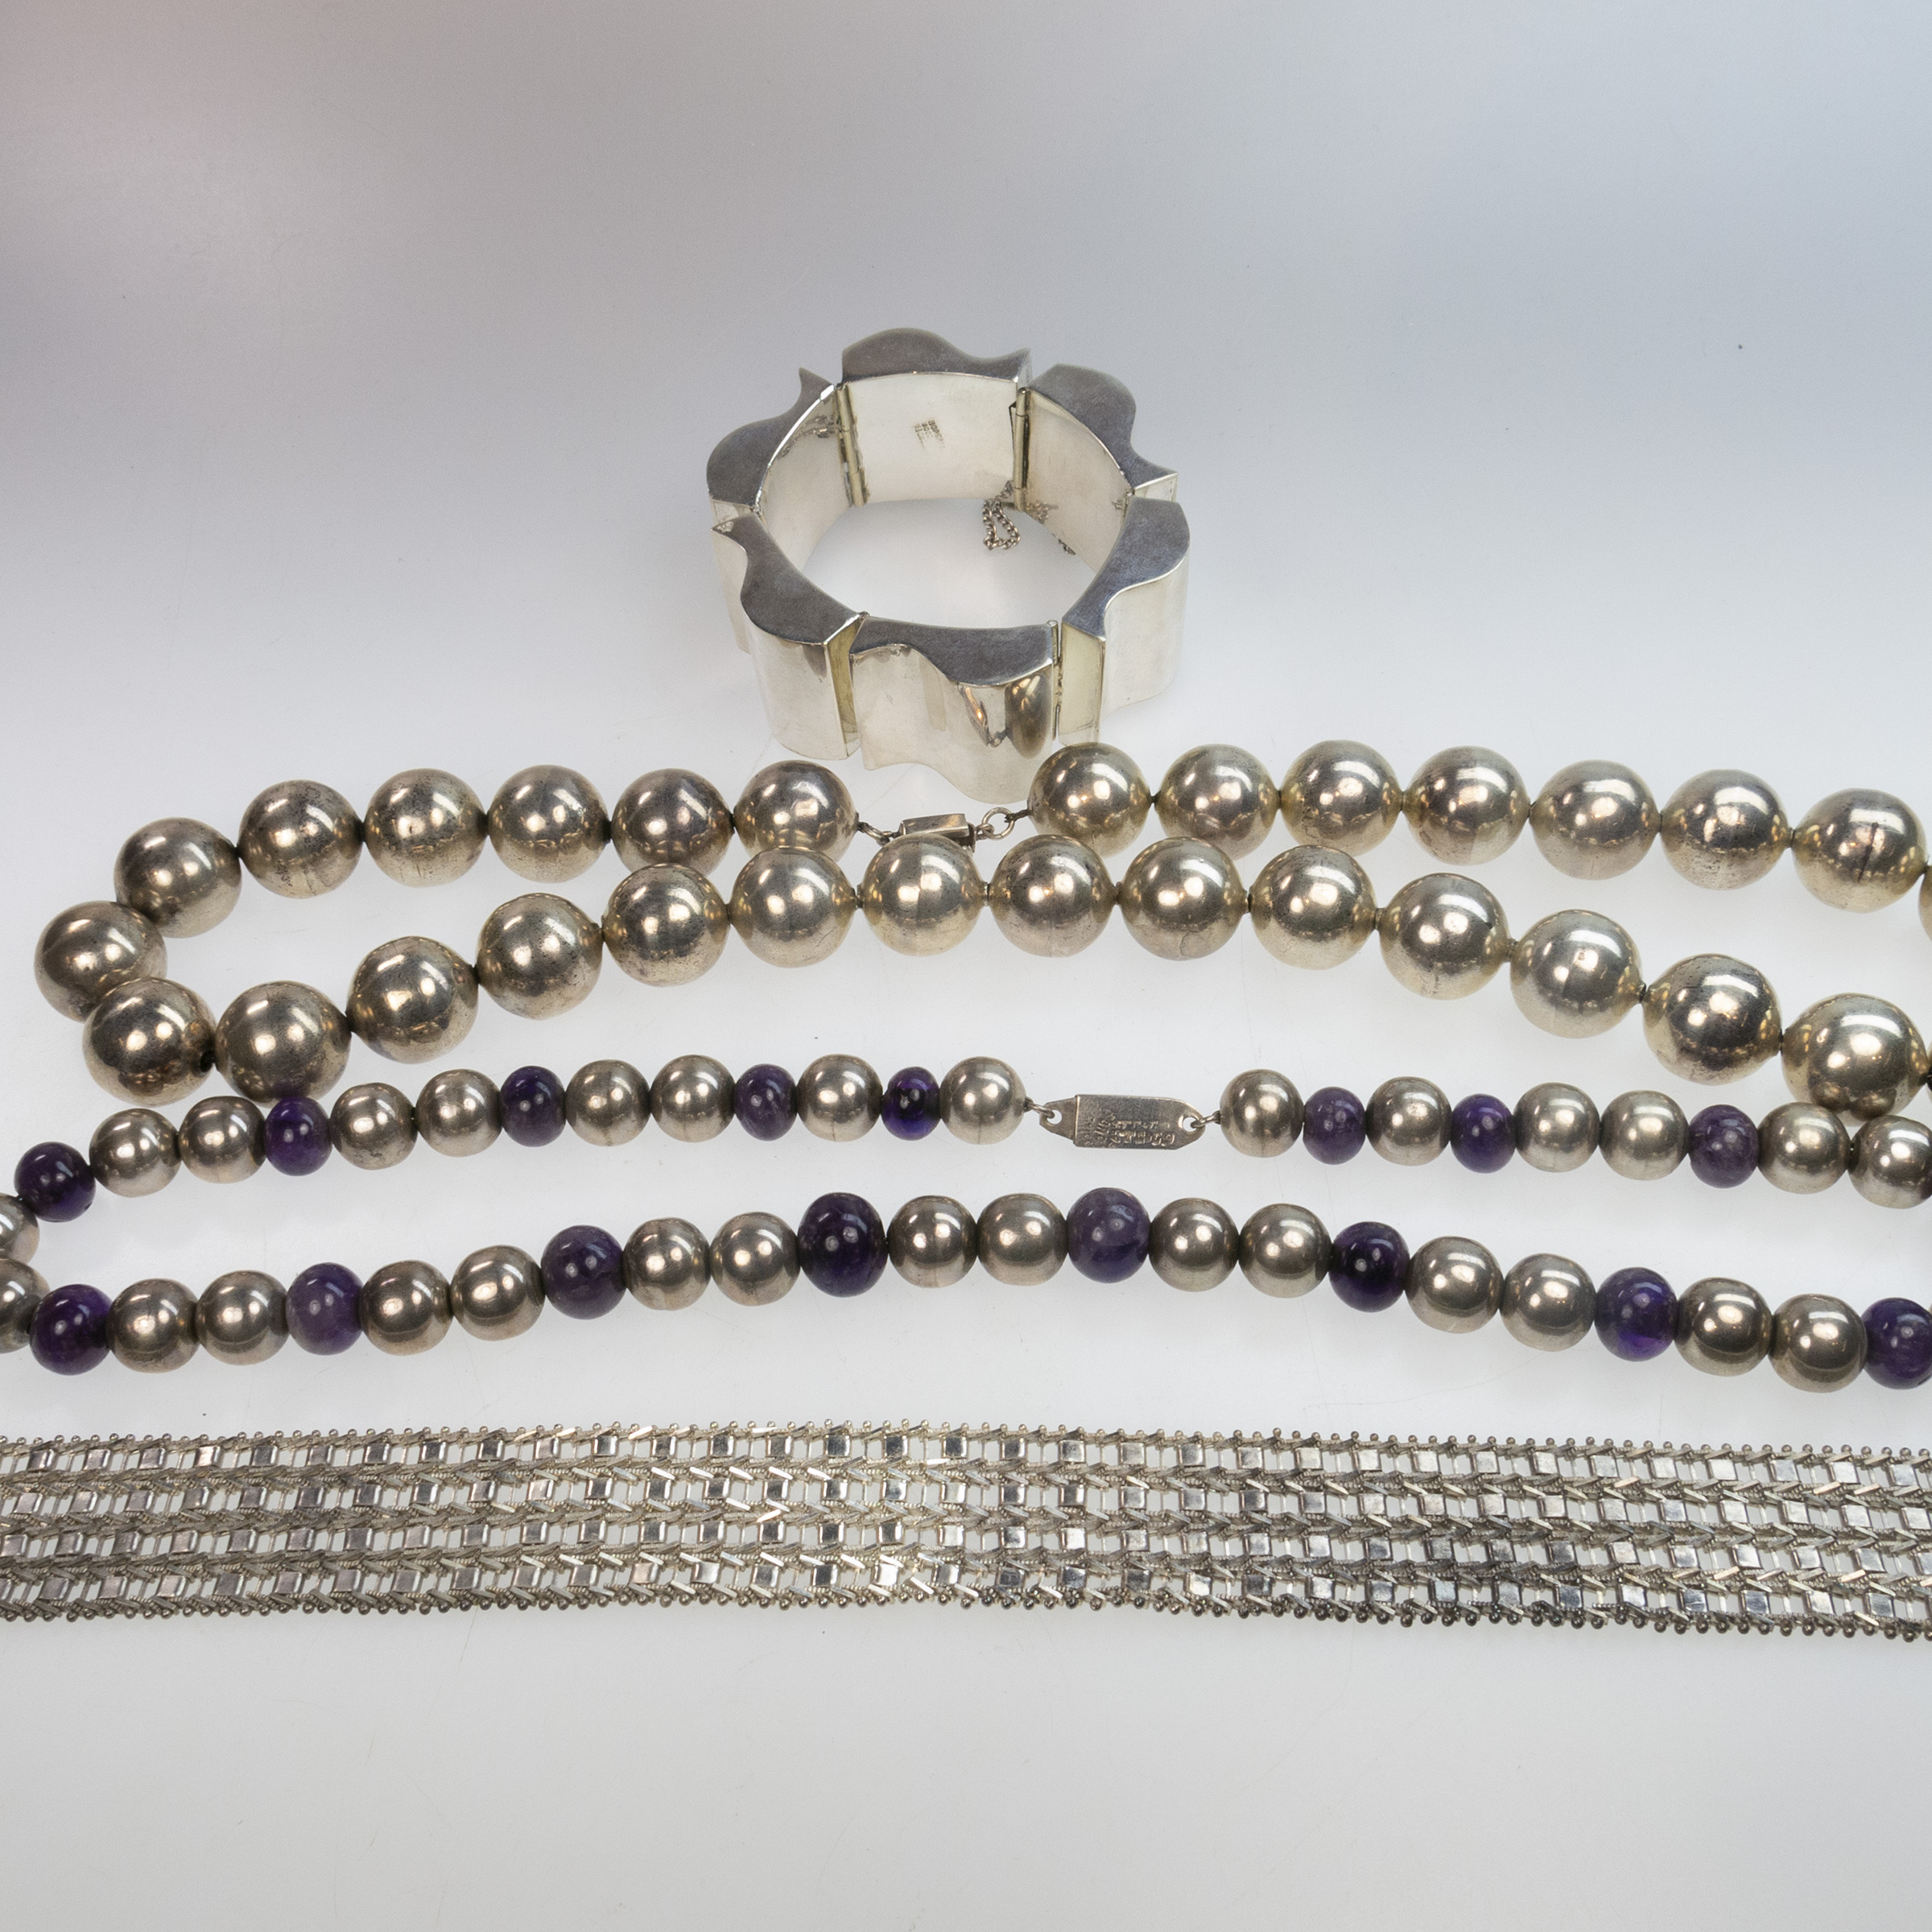 Four Examples of Mexican Silver Jewellery